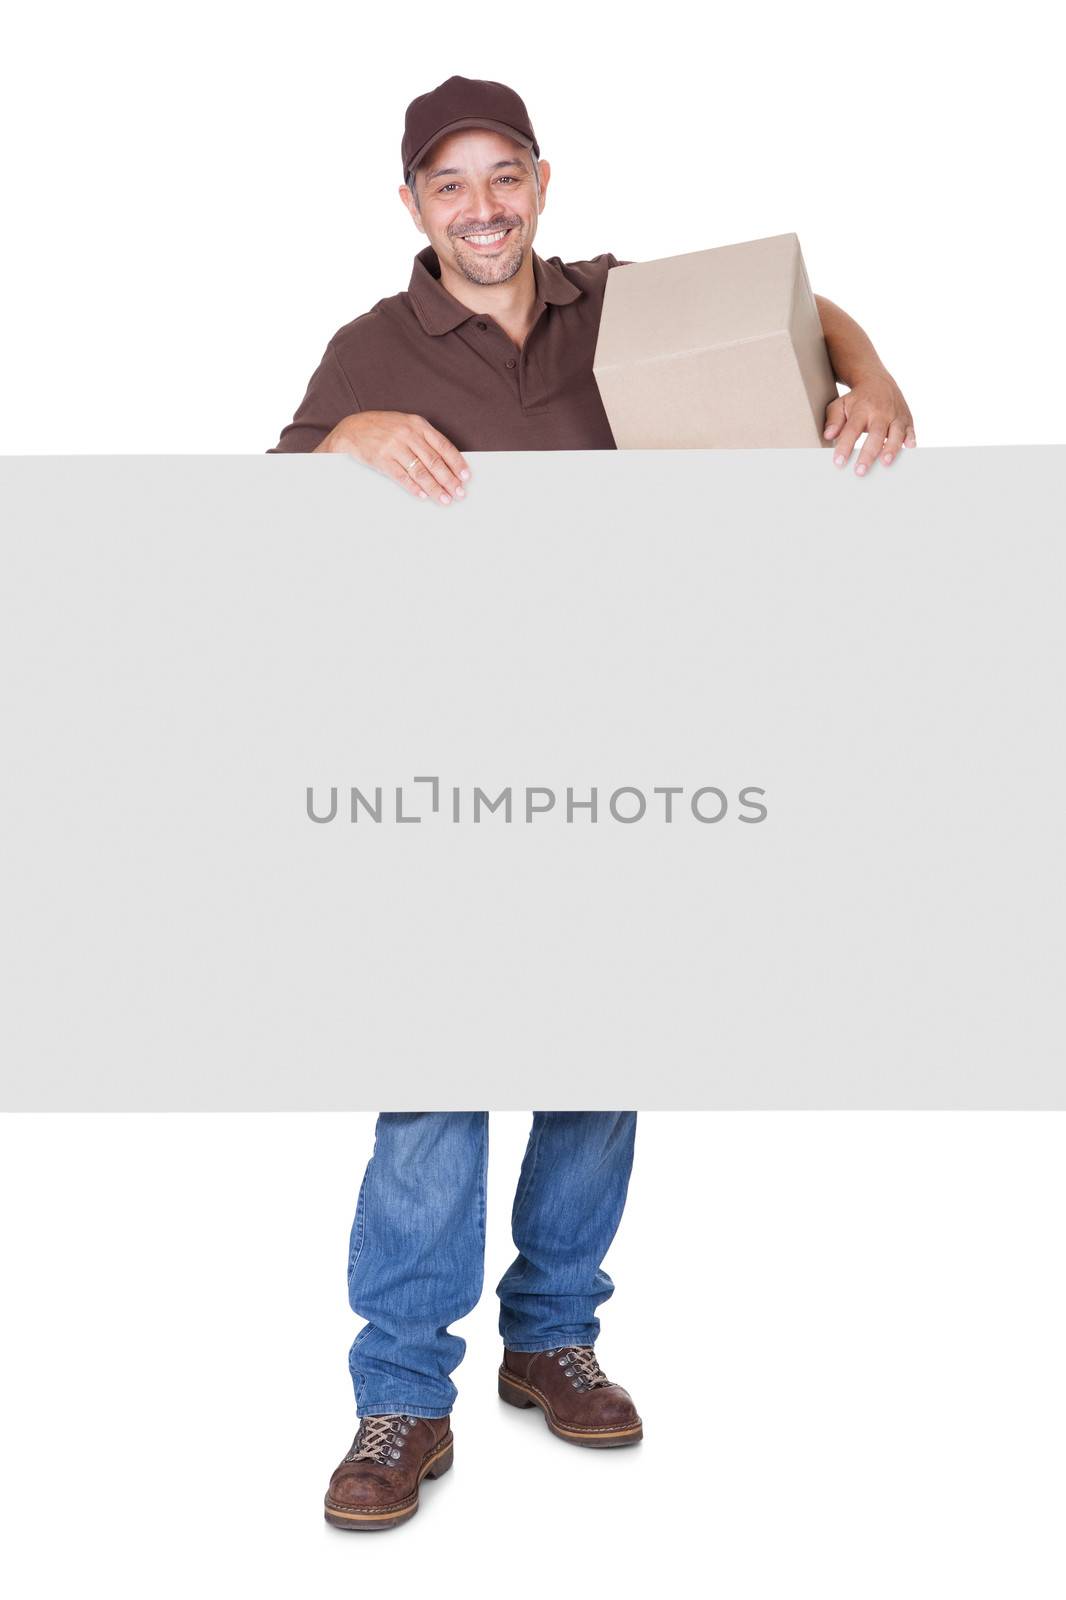 Happy Delivery Man Holding Cardbox And Placard Isolated On White Background